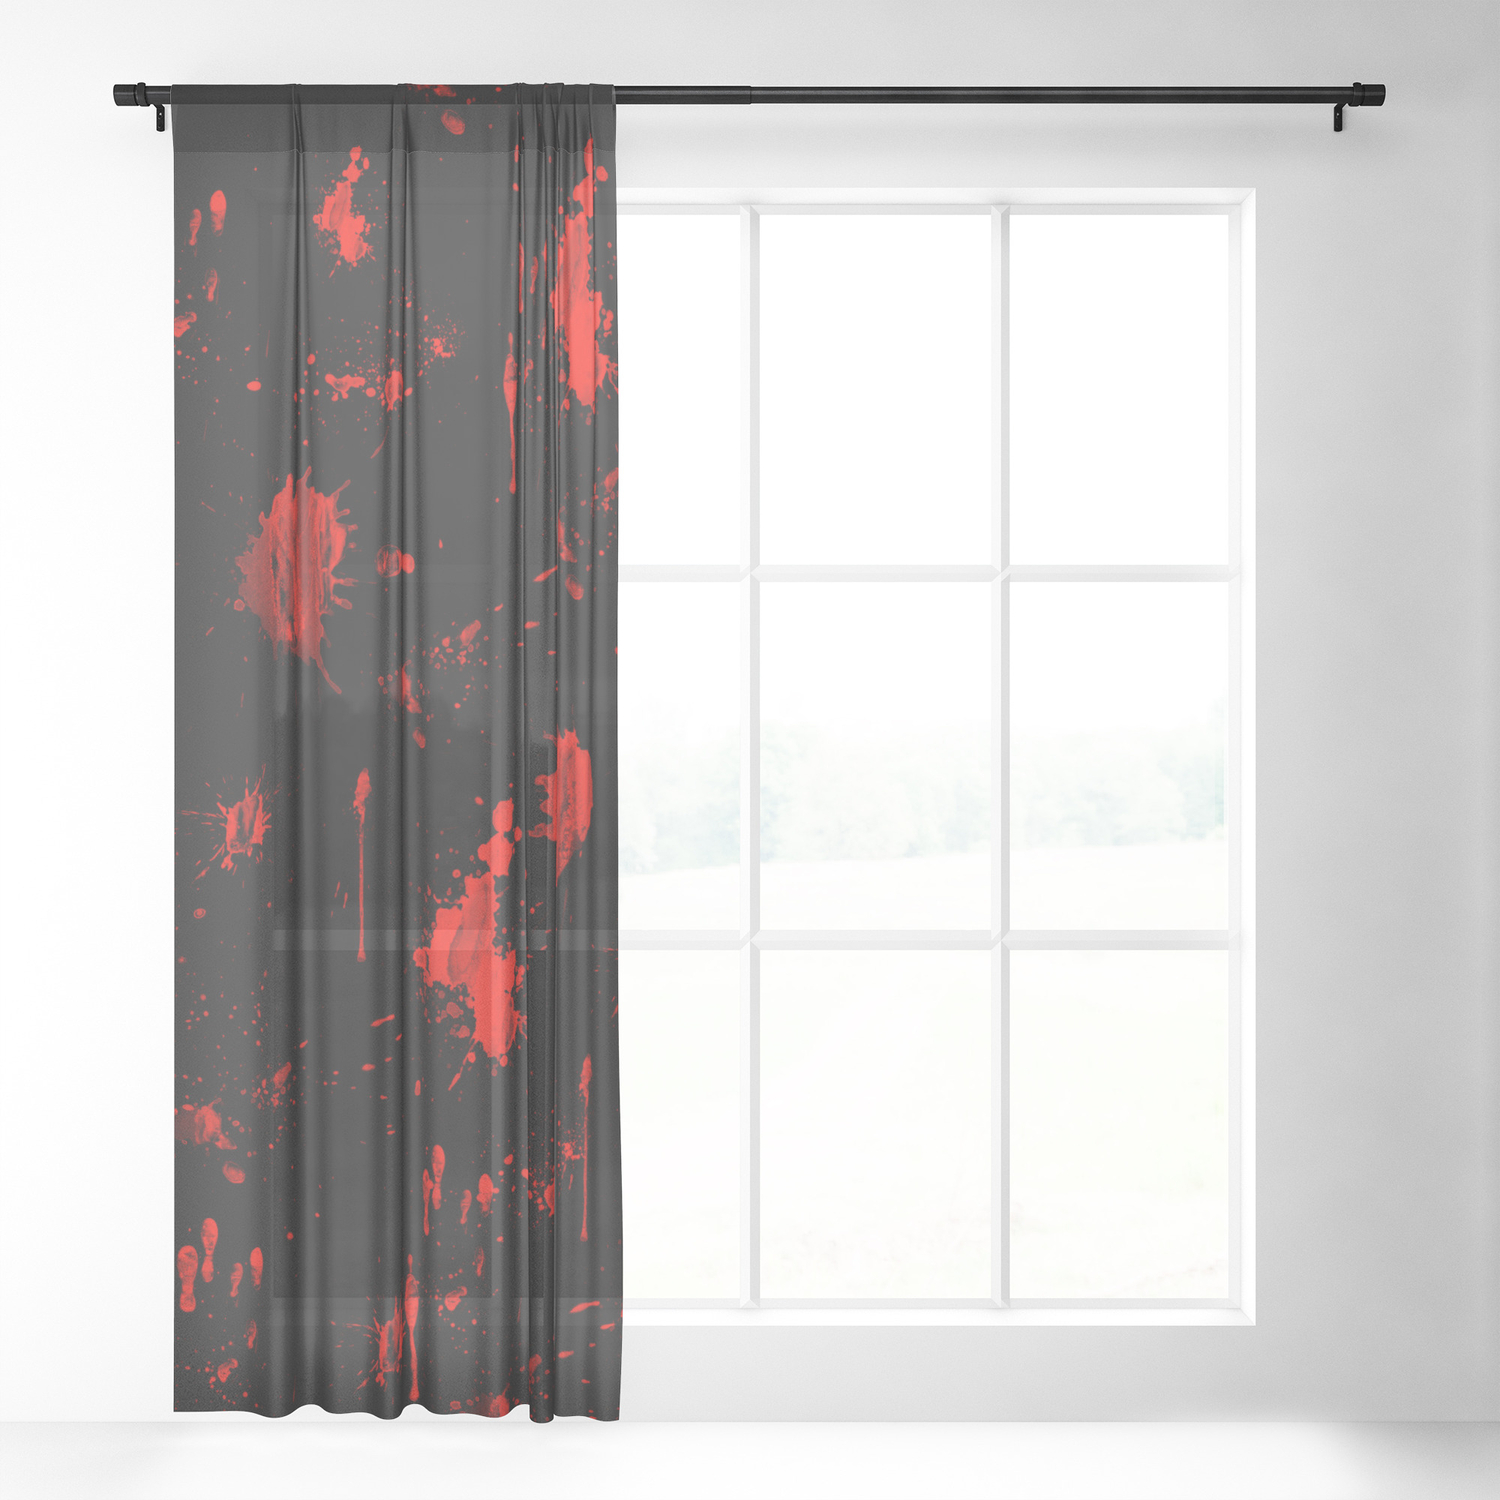 Red Paint Blood Splatter On Black Sheer Curtain By Scotthervieux